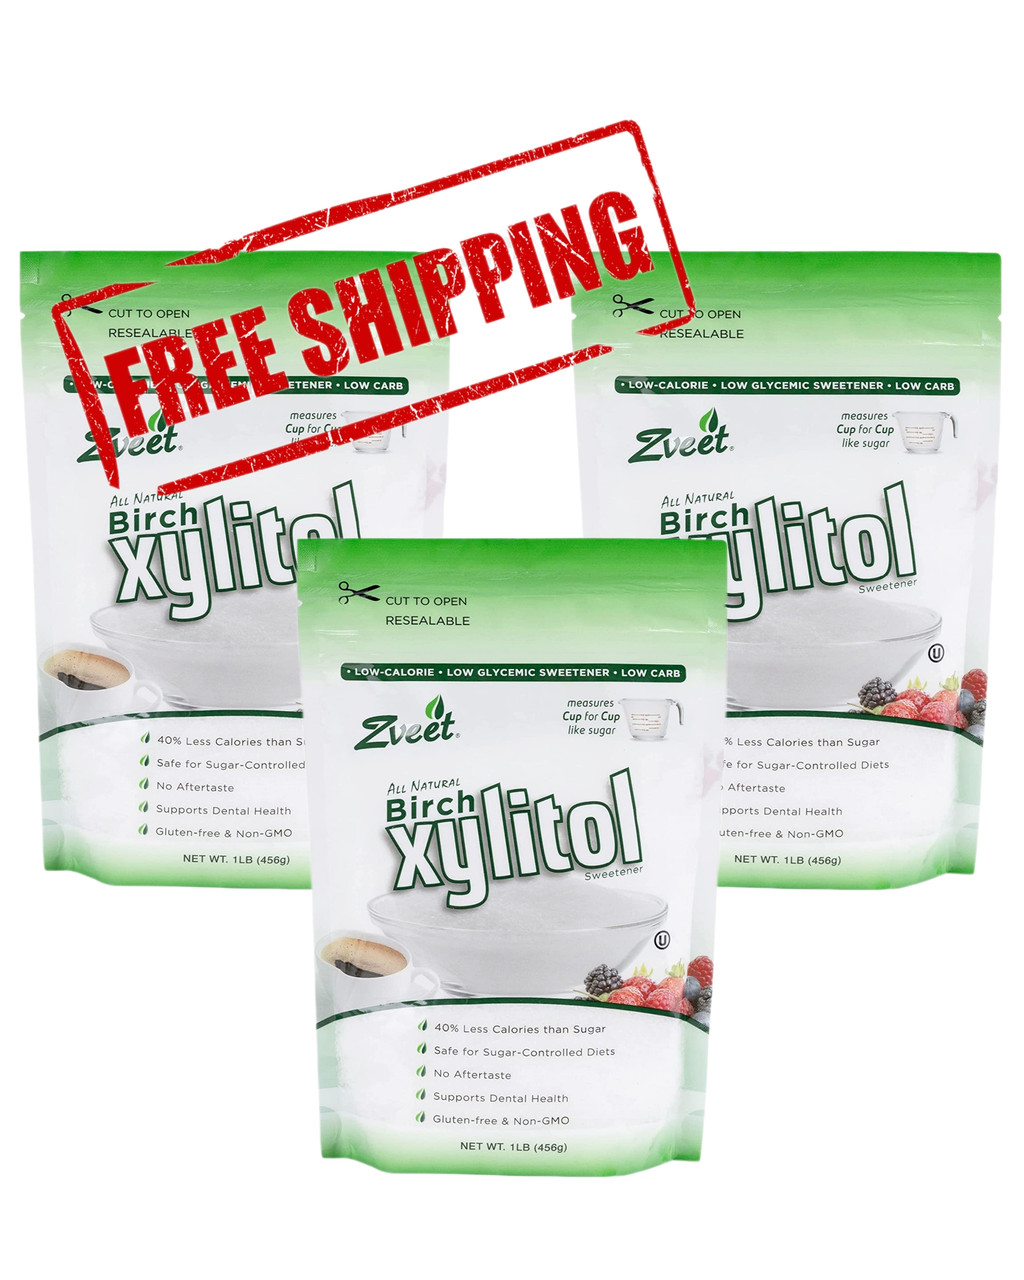 Xylitol: Is it Healthy or Safe?